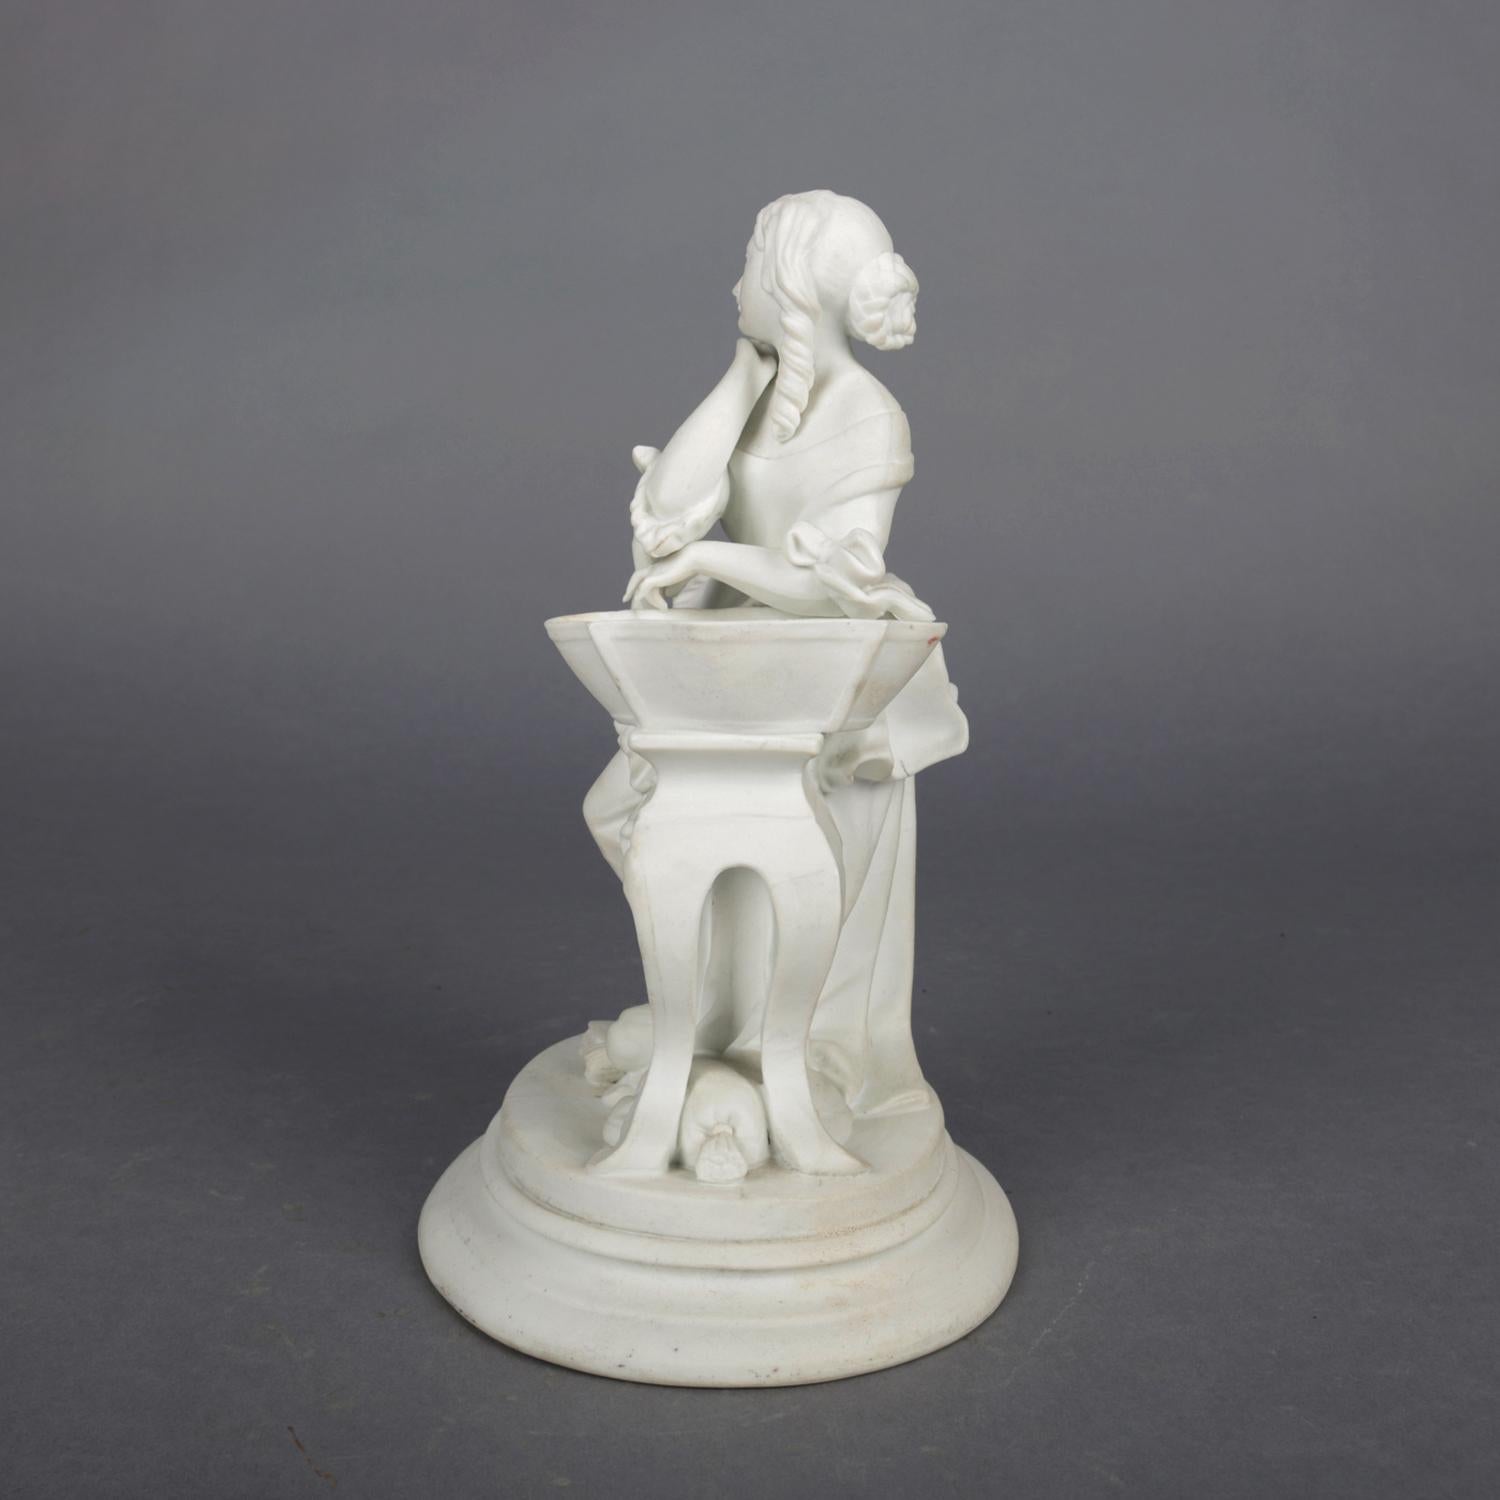 Victorian Antique English Parian Figural Genre Grouping of Woman & Washstand, 19th Century